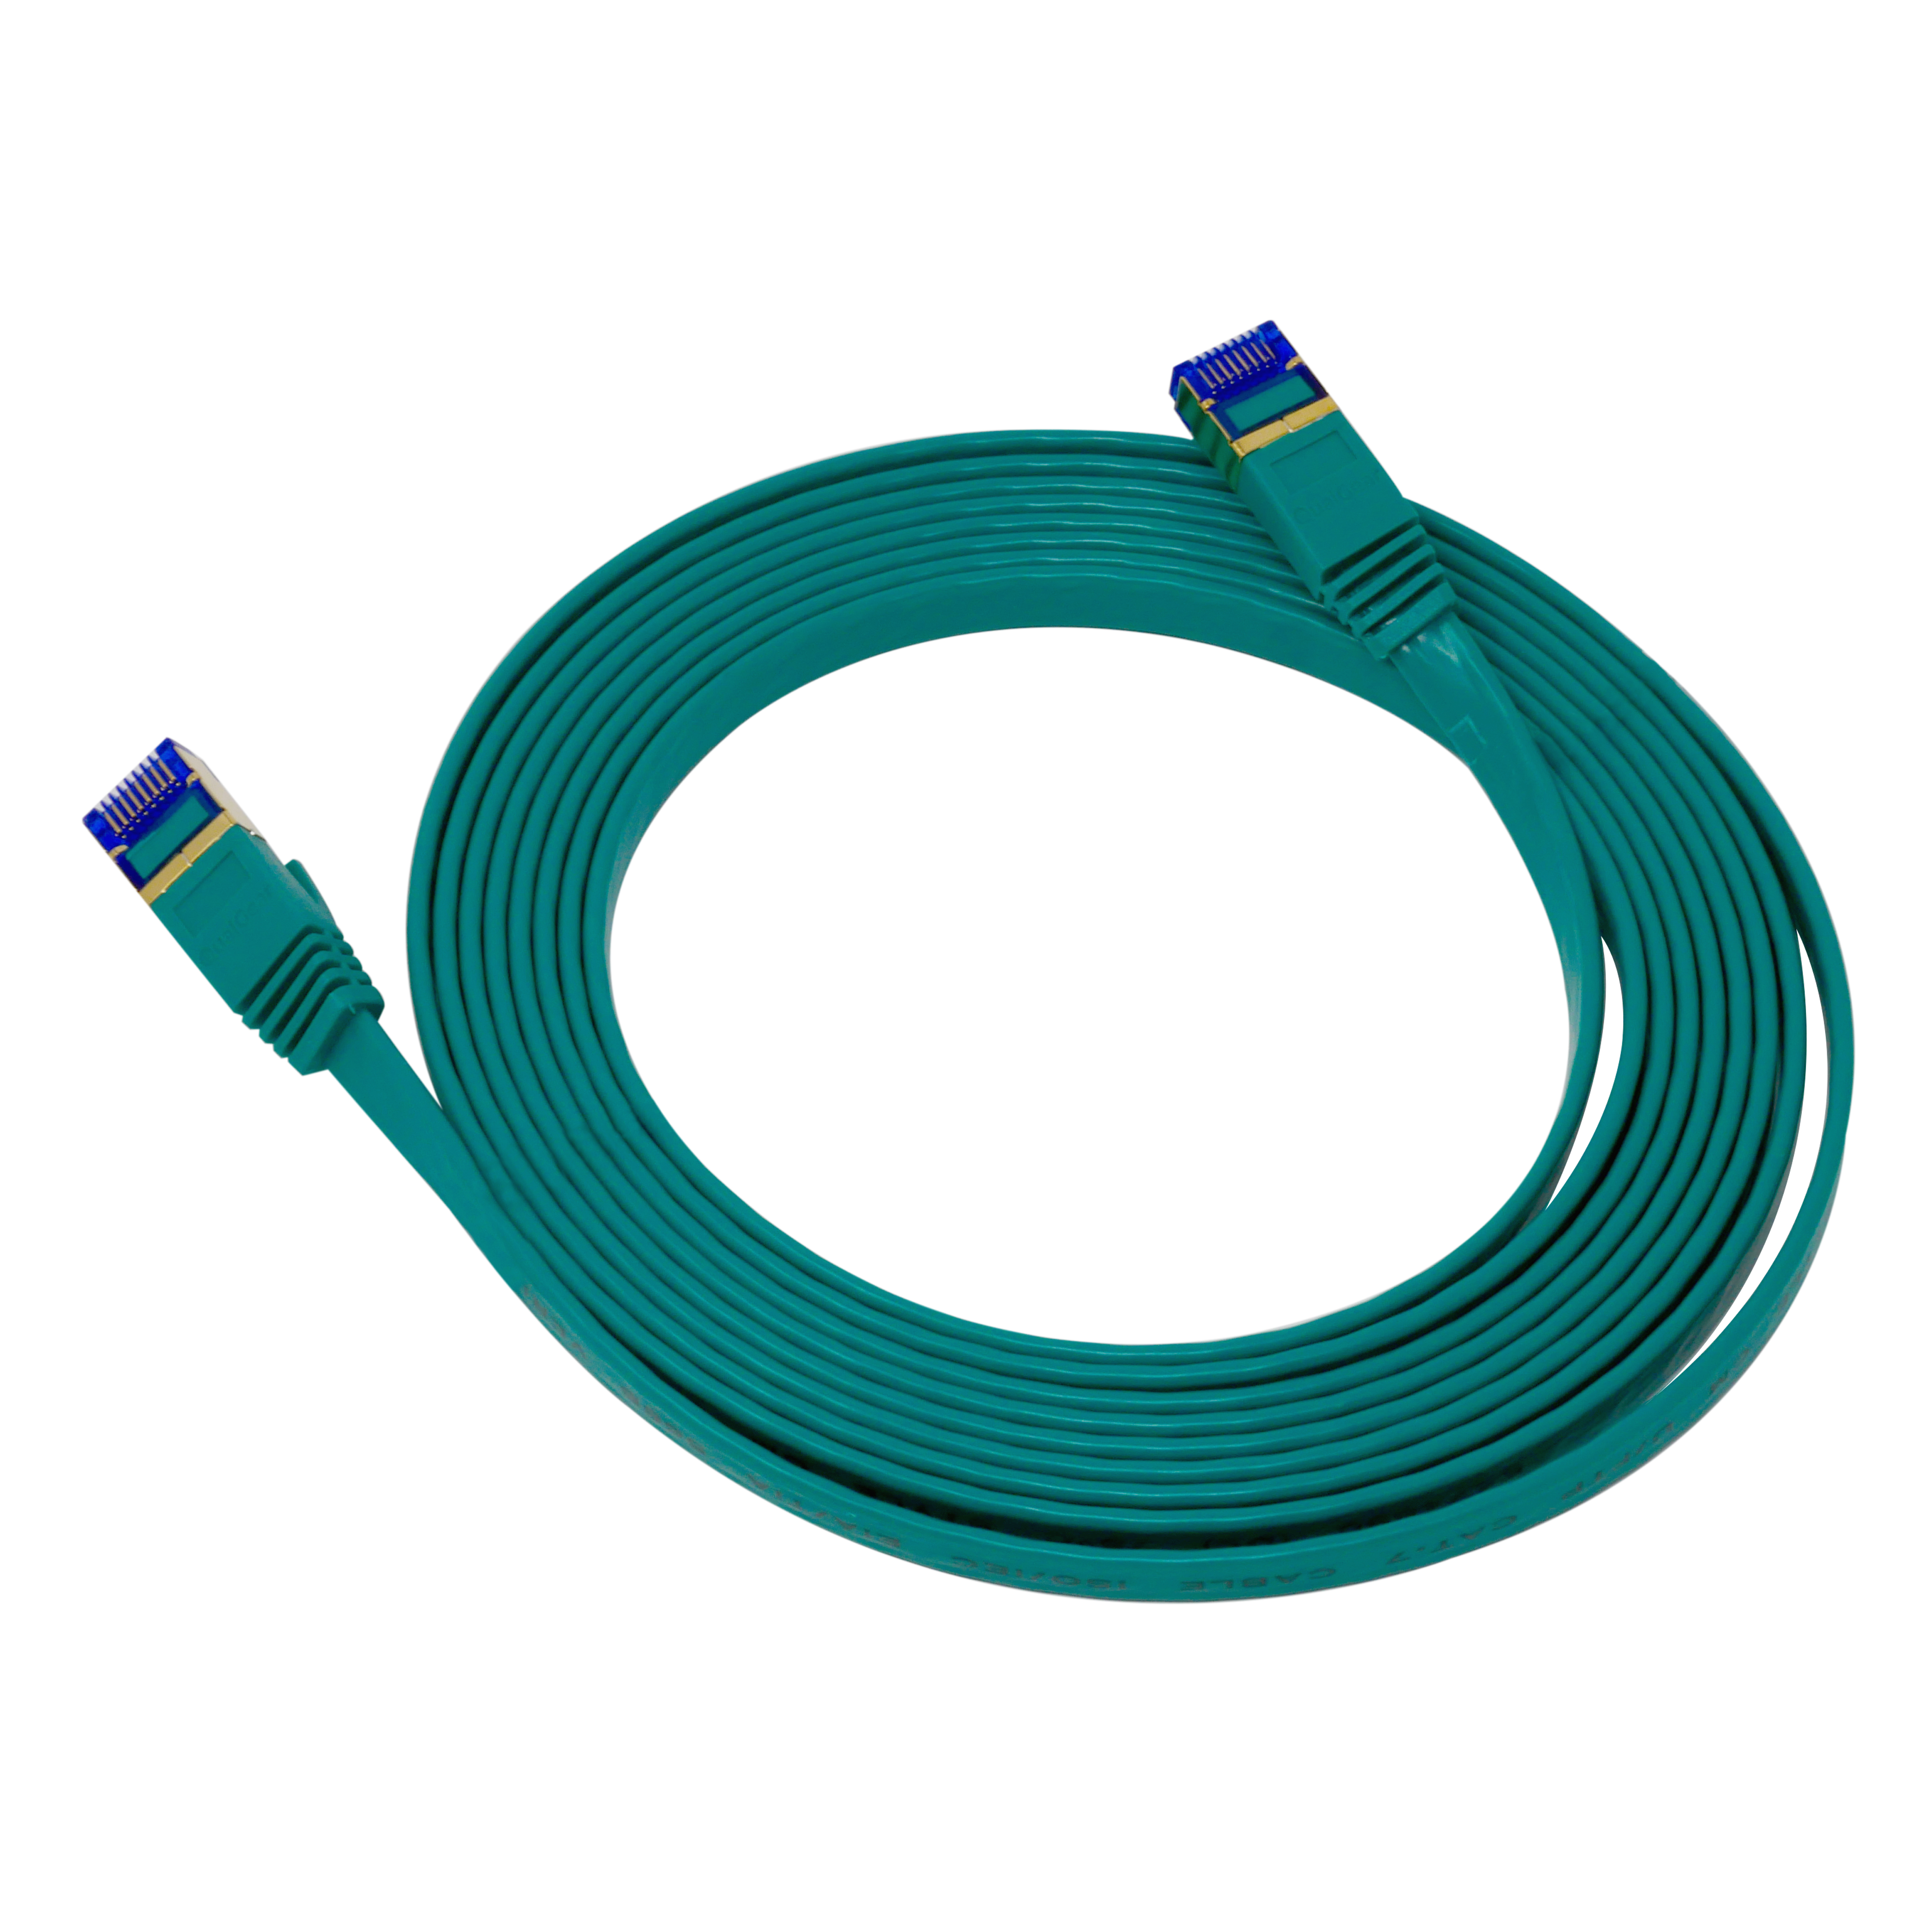 QualGear QG-CAT7F-10FT-GRN CAT 7 S/FTP Ethernet Cable Length 10 feet - 26 AWG, 10 Gbps, Gold Plated Contacts, RJ45, 99.99% OFC Copper, Color Green 